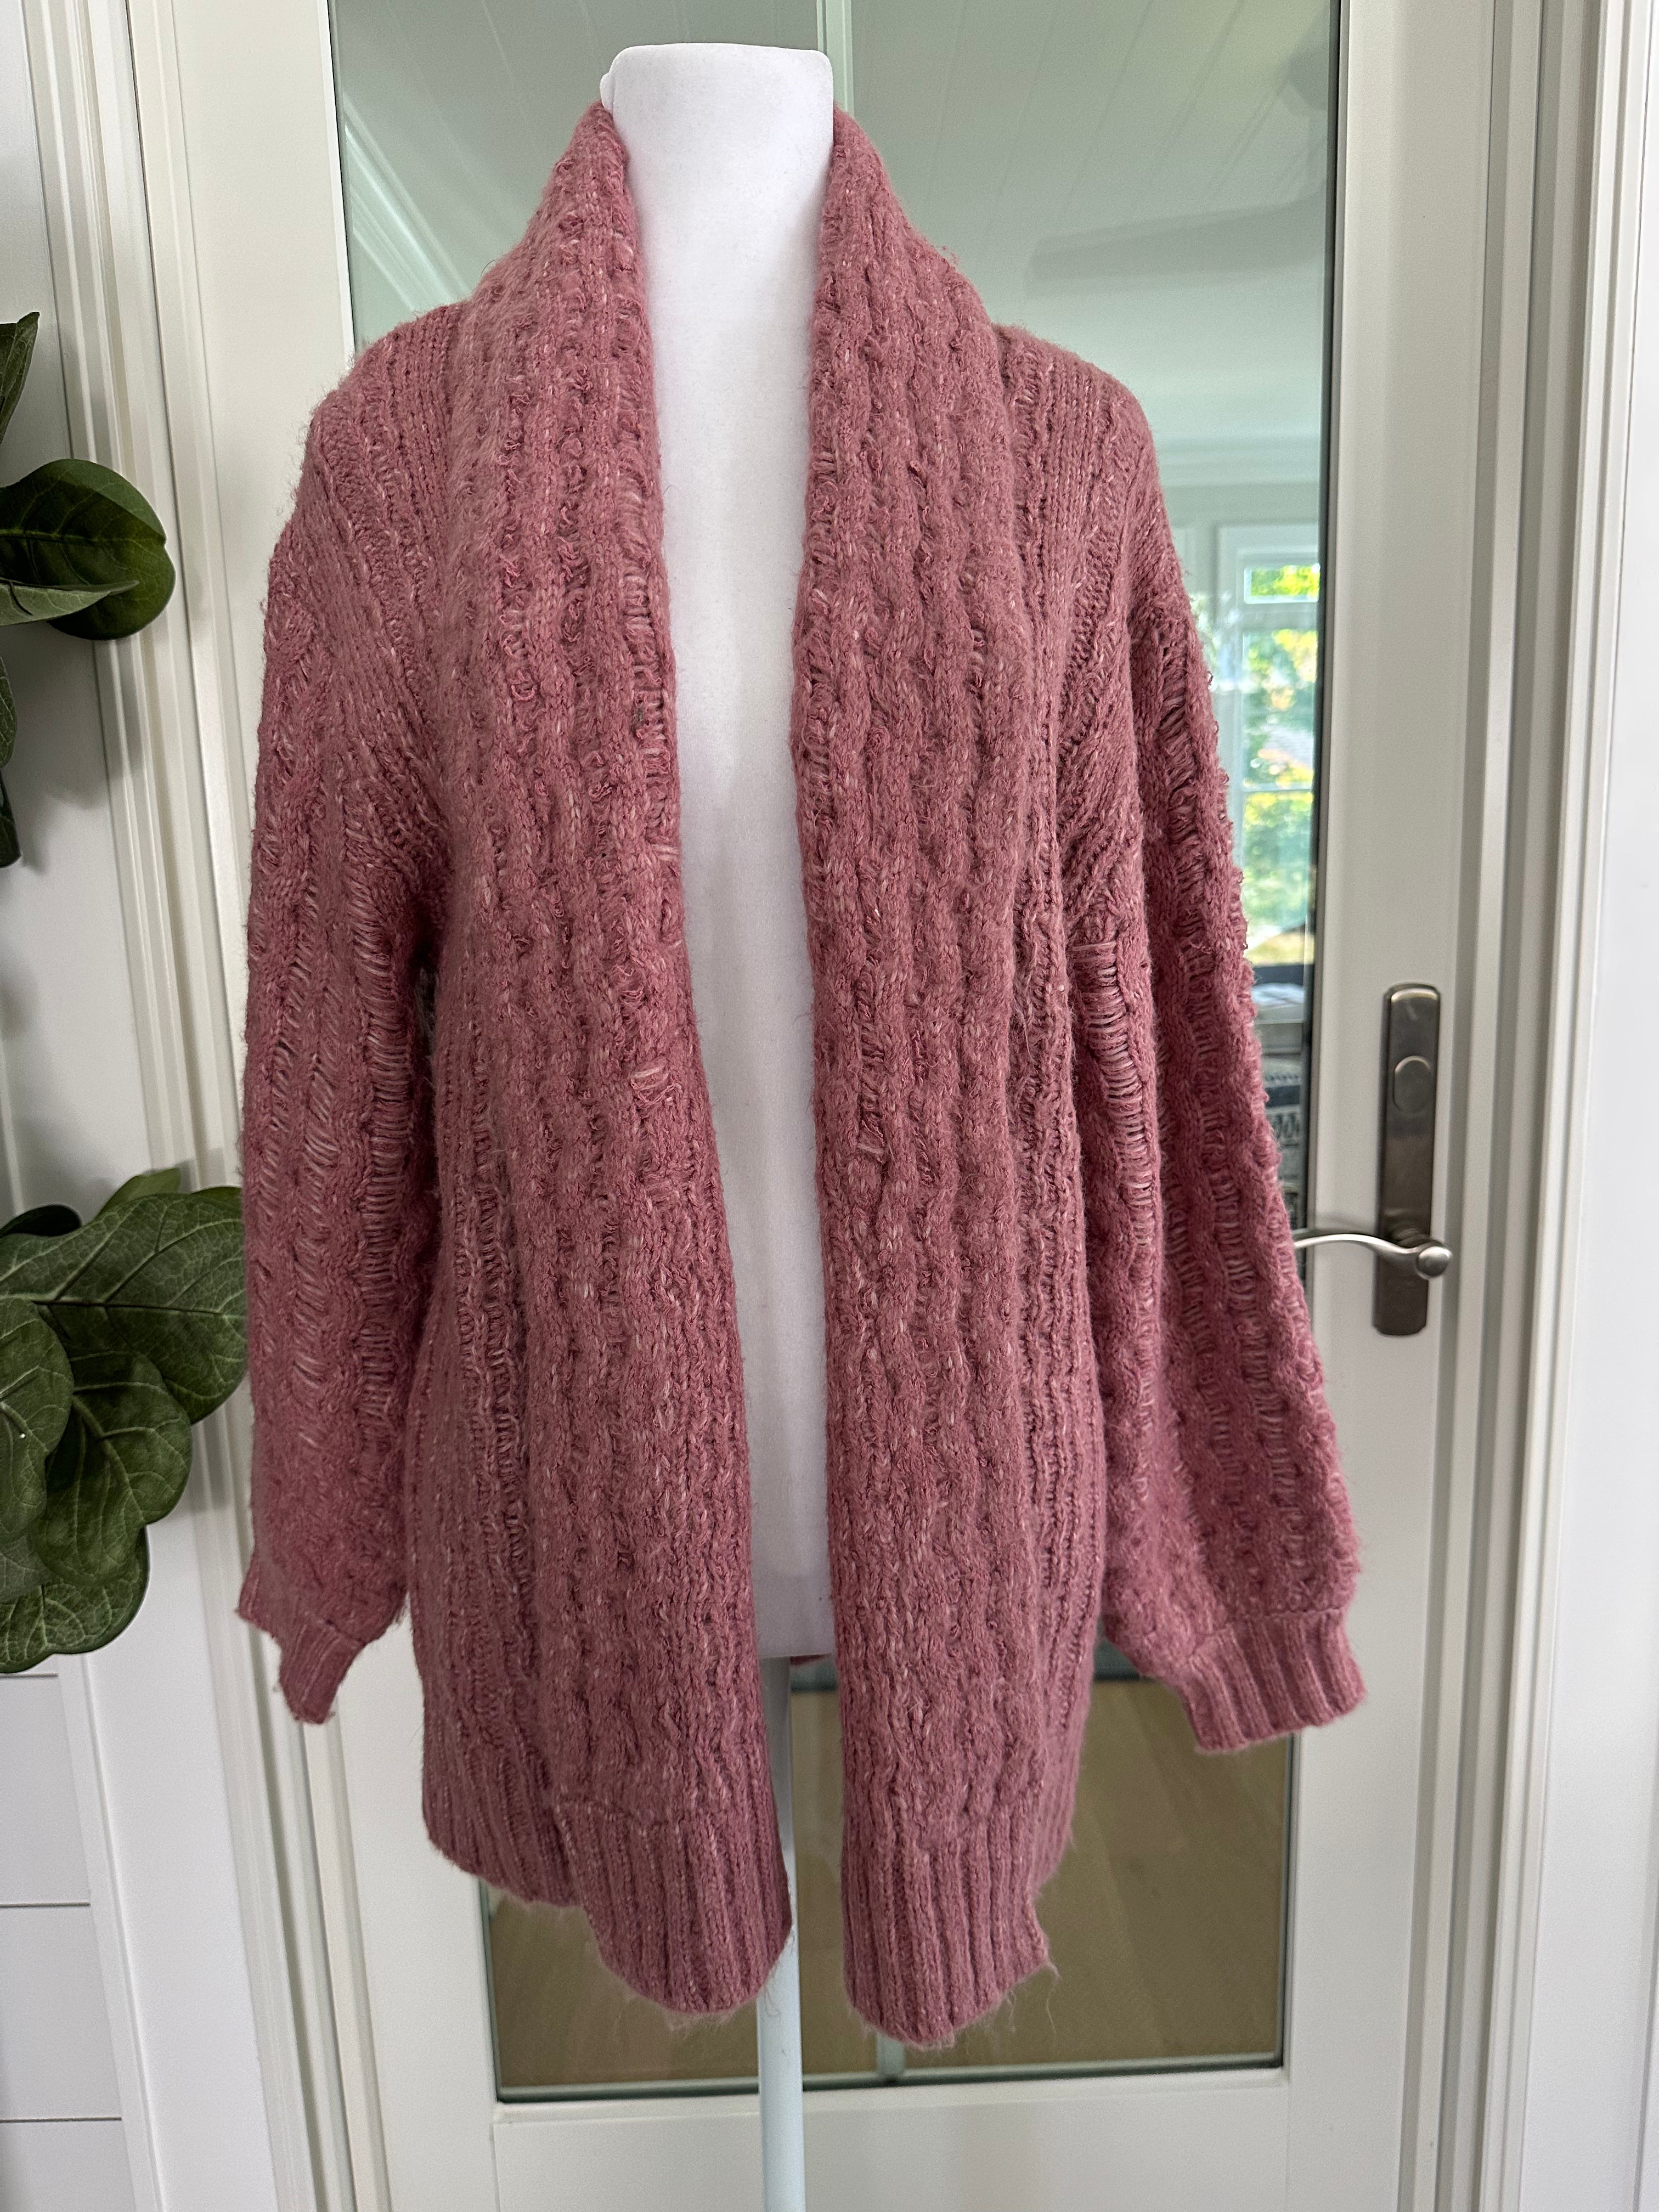 Anthropologie Cardigan Sweater, Rose Womens Size S